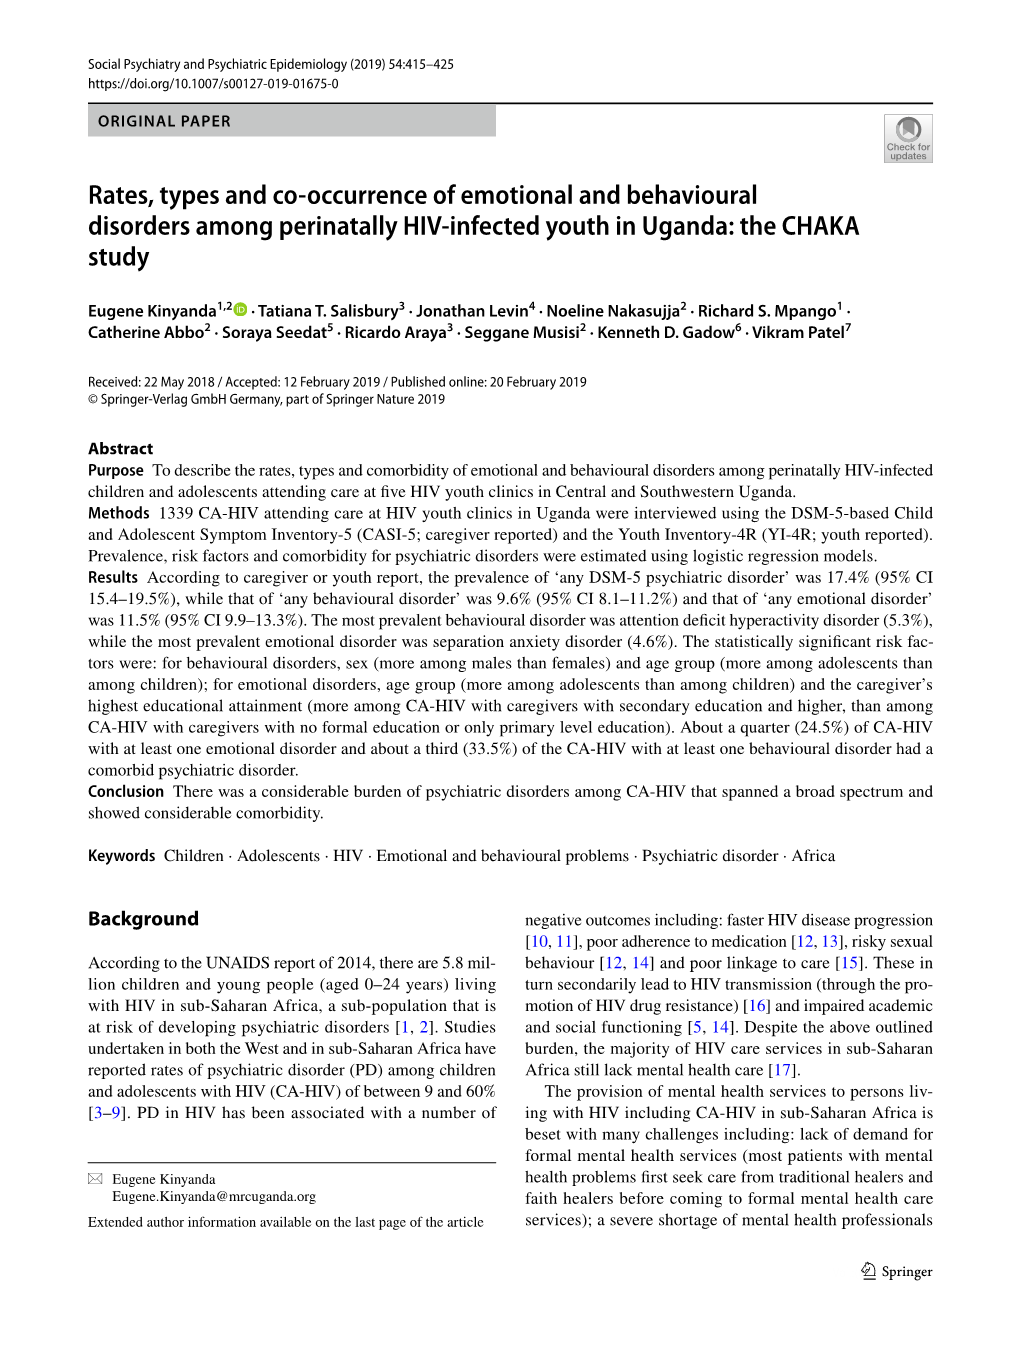 Rates, Types and Co-Occurrence of Emotional and Behavioural Disorders Among Perinatally HIV-Infected Youth in Uganda: the CHAKA Study